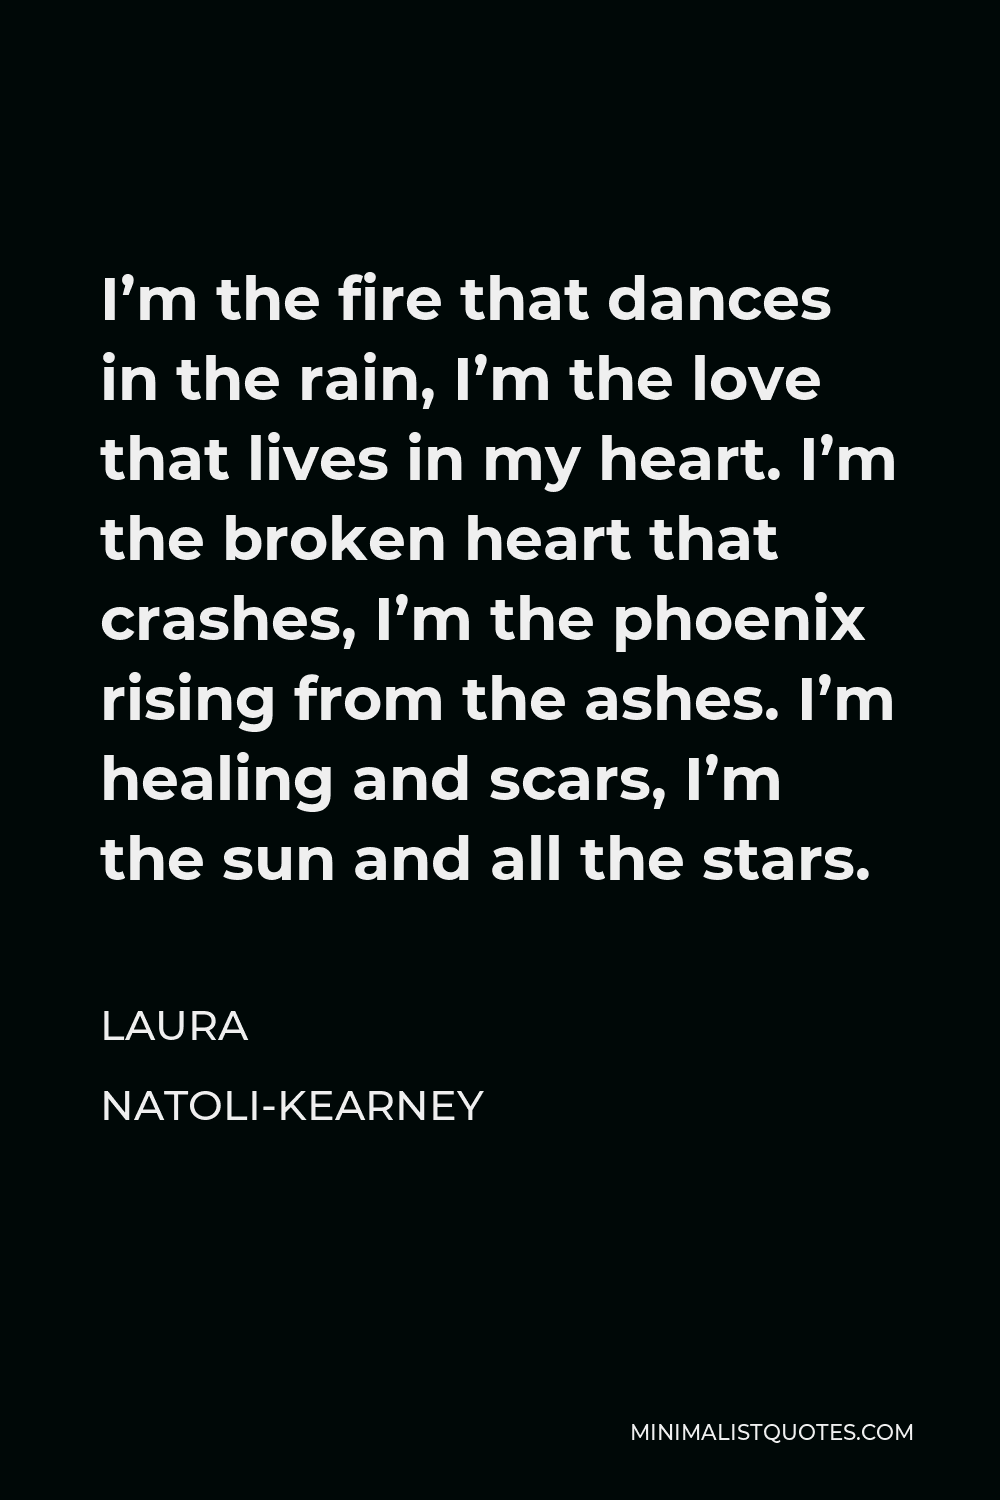 Laura Natoli-Kearney Quote - I’m the fire that dances in the rain, I’m the love that lives in my heart. I’m the broken heart that crashes, I’m the phoenix rising from the ashes. I’m healing and scars, I’m the sun and all the stars.